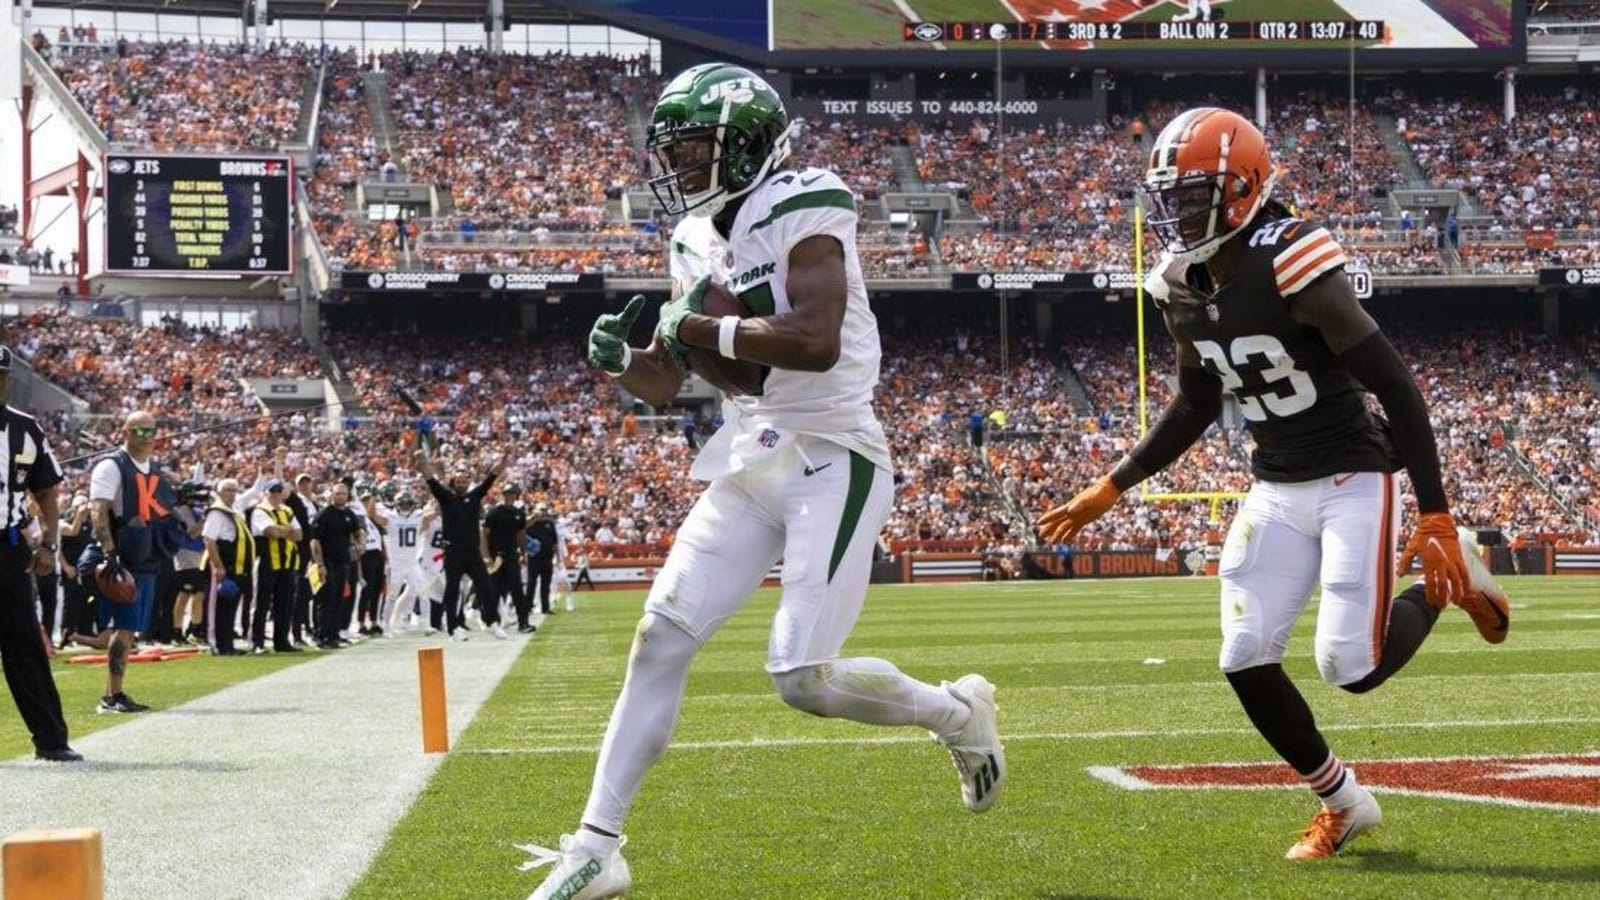 Jets score two late TDs to stun Browns